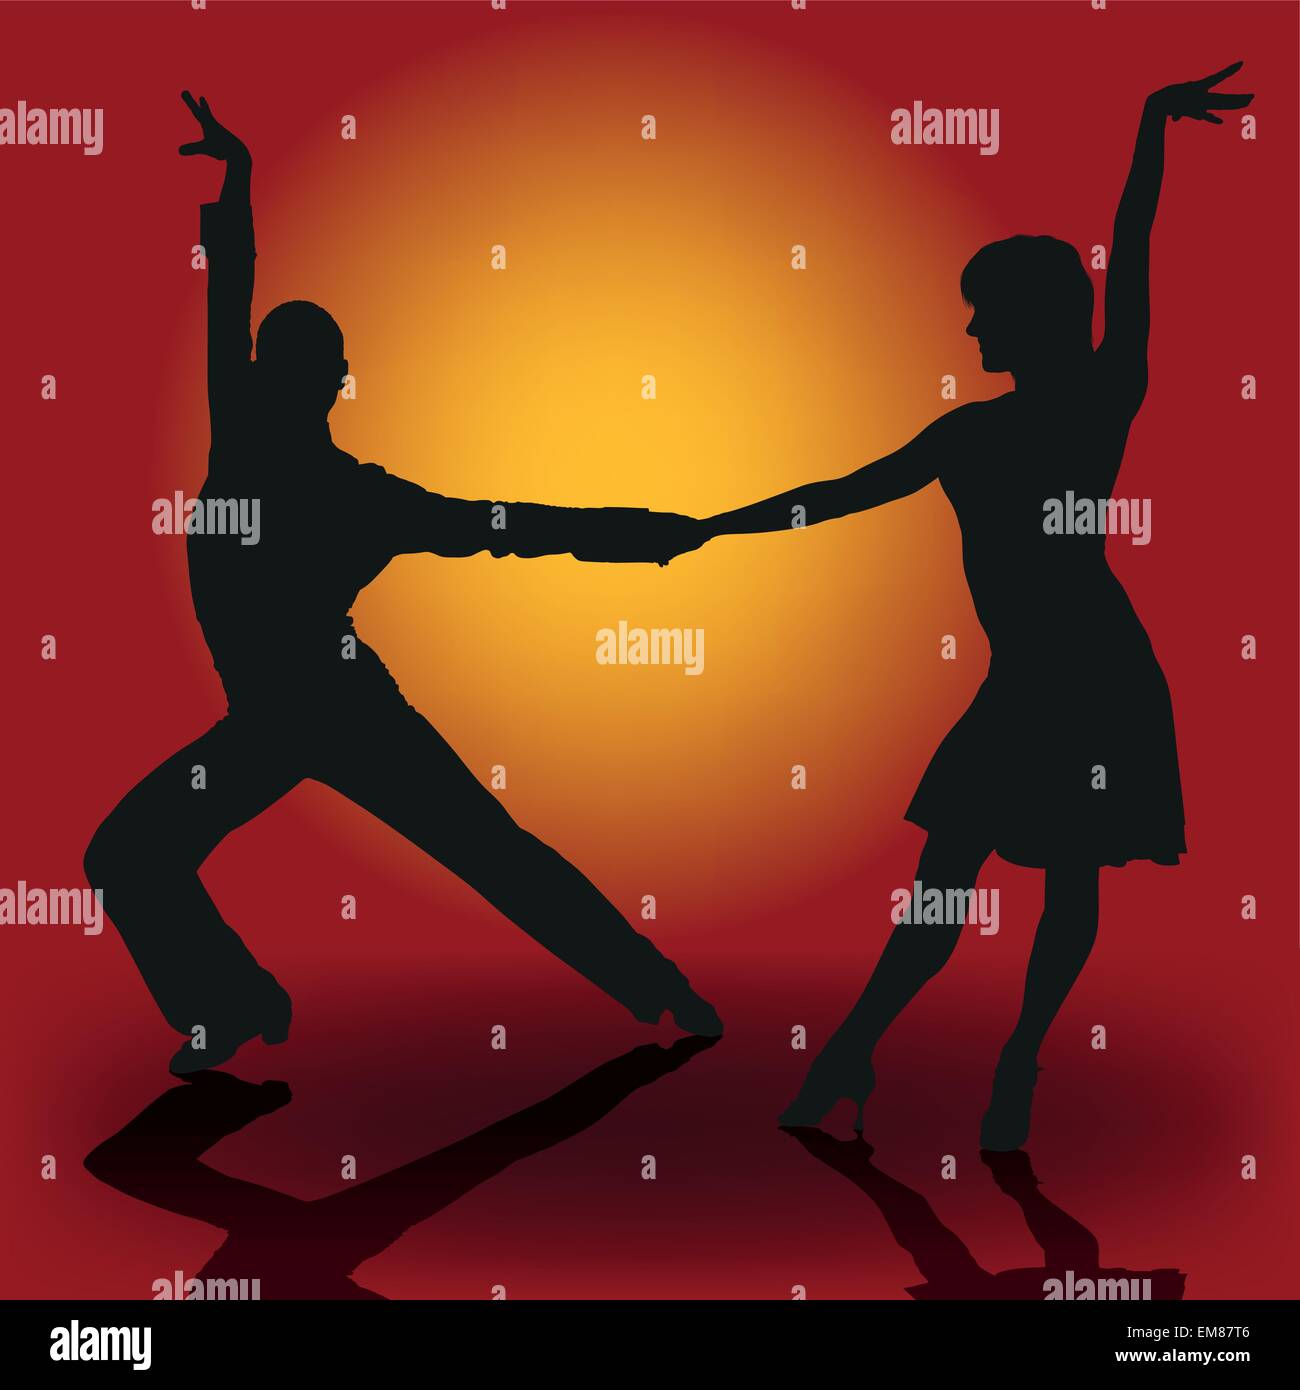 Dancing Silhouettes Stock Vector